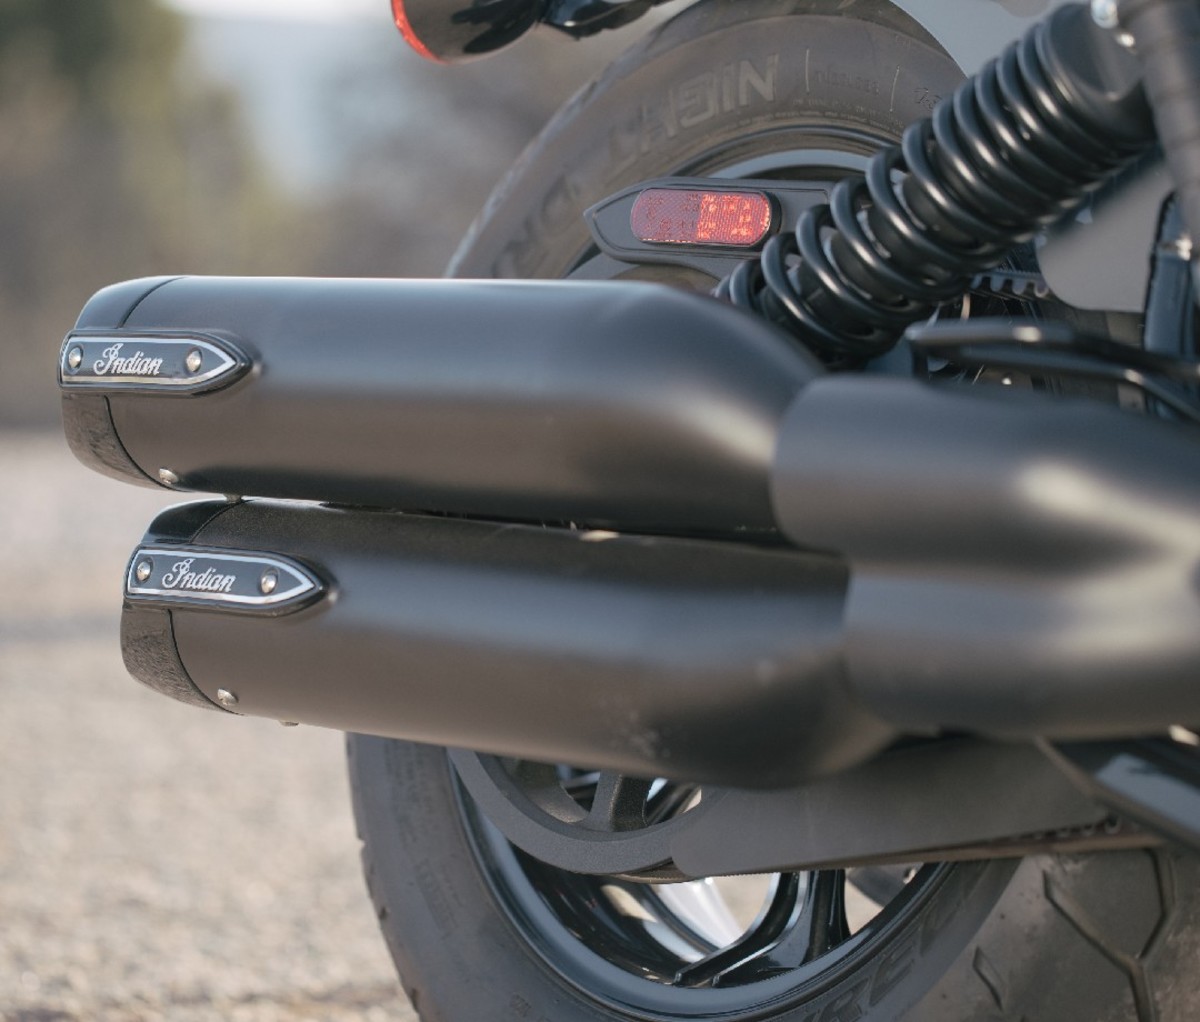 Closeup of dual tail pipes on a 2022 Indian Chief motorcycle